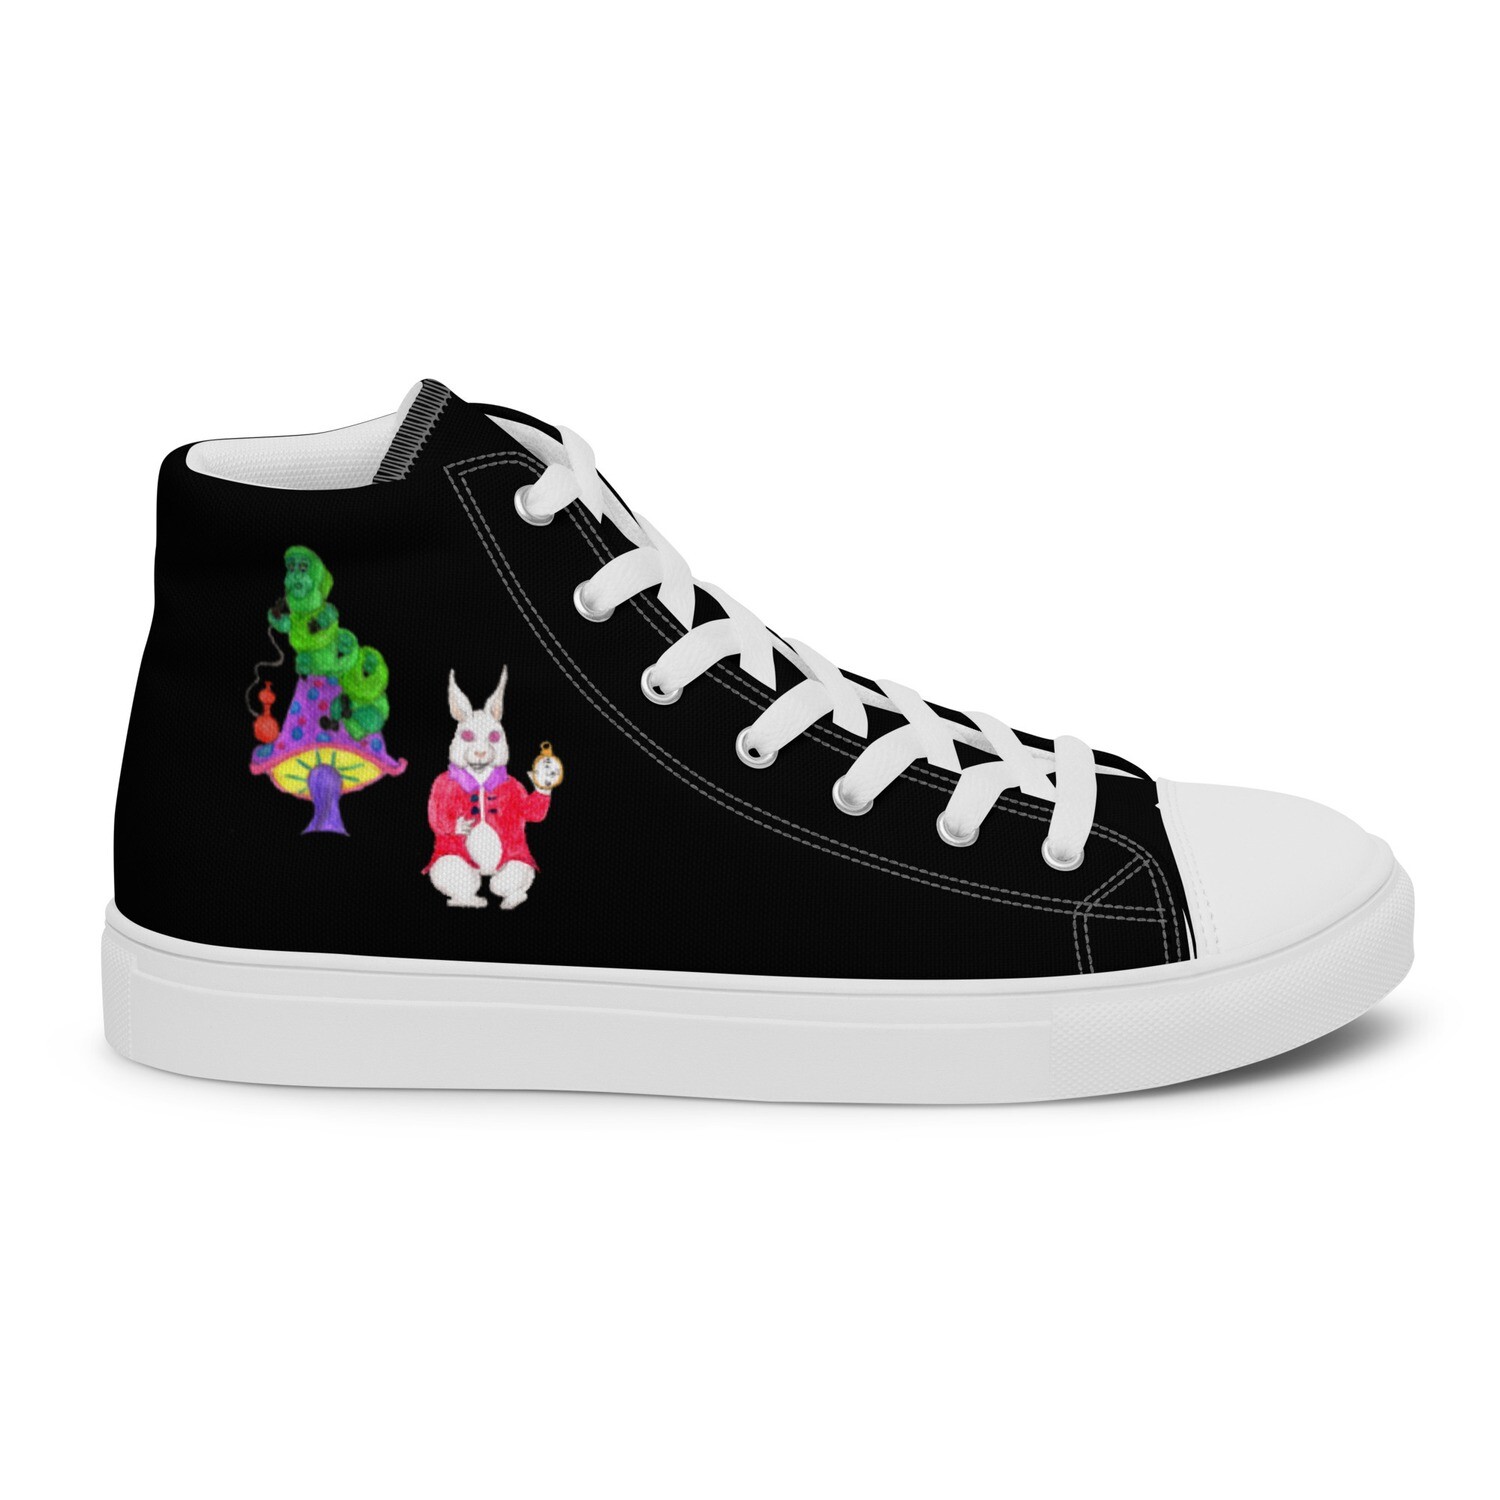 Alice In Wonderland women’s high top canvas shoes